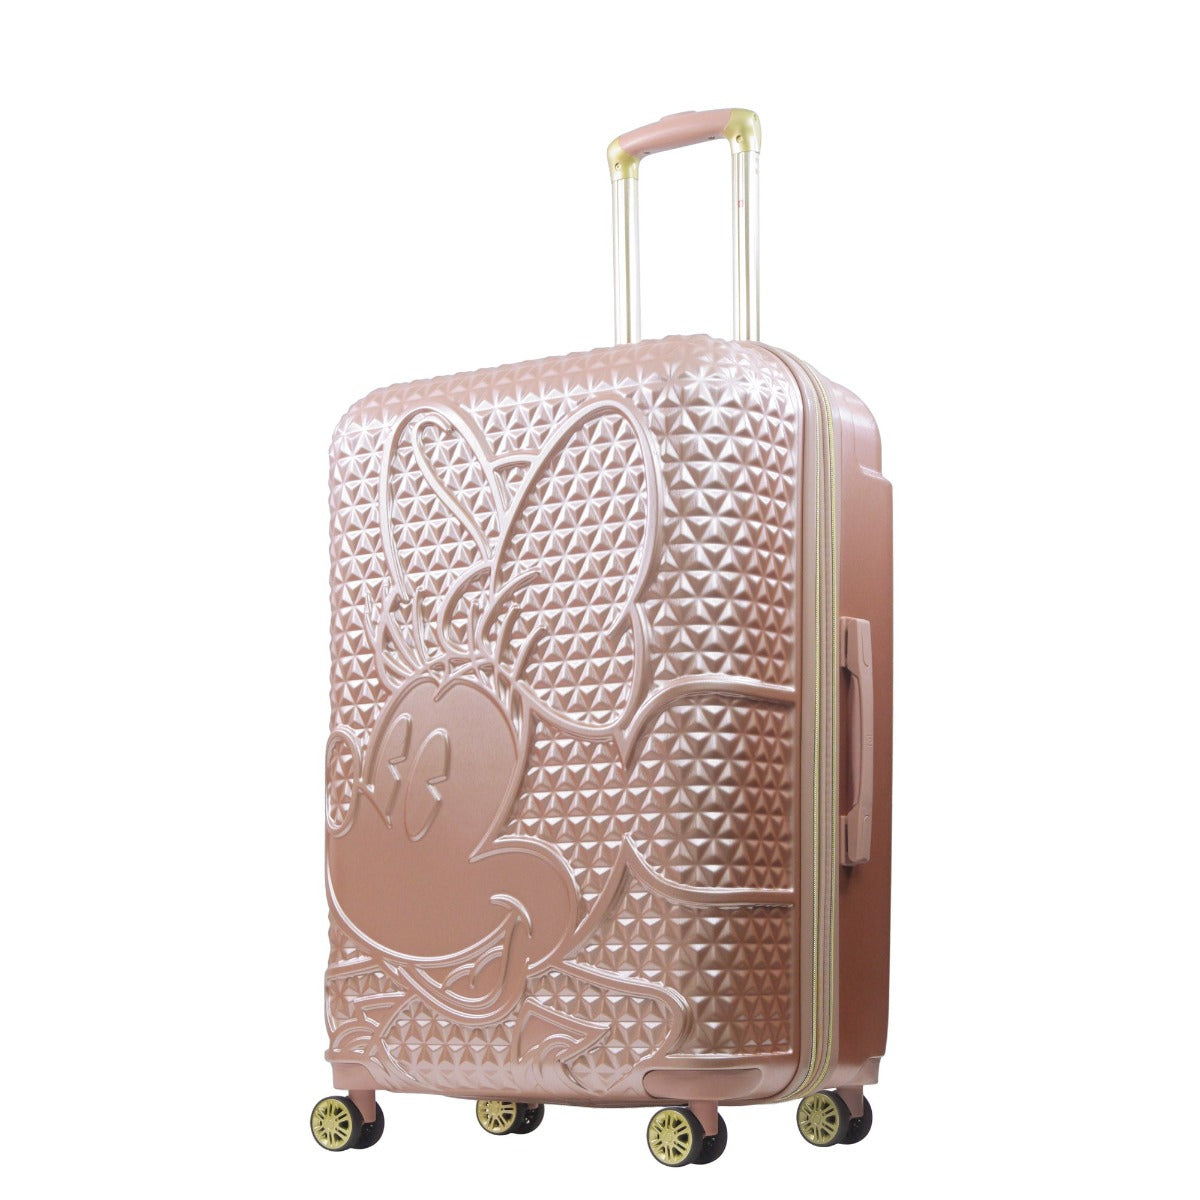 Ful Disney Minnie Mouse 30" luggage spinner rose gold - best hardshell suitcase for travel